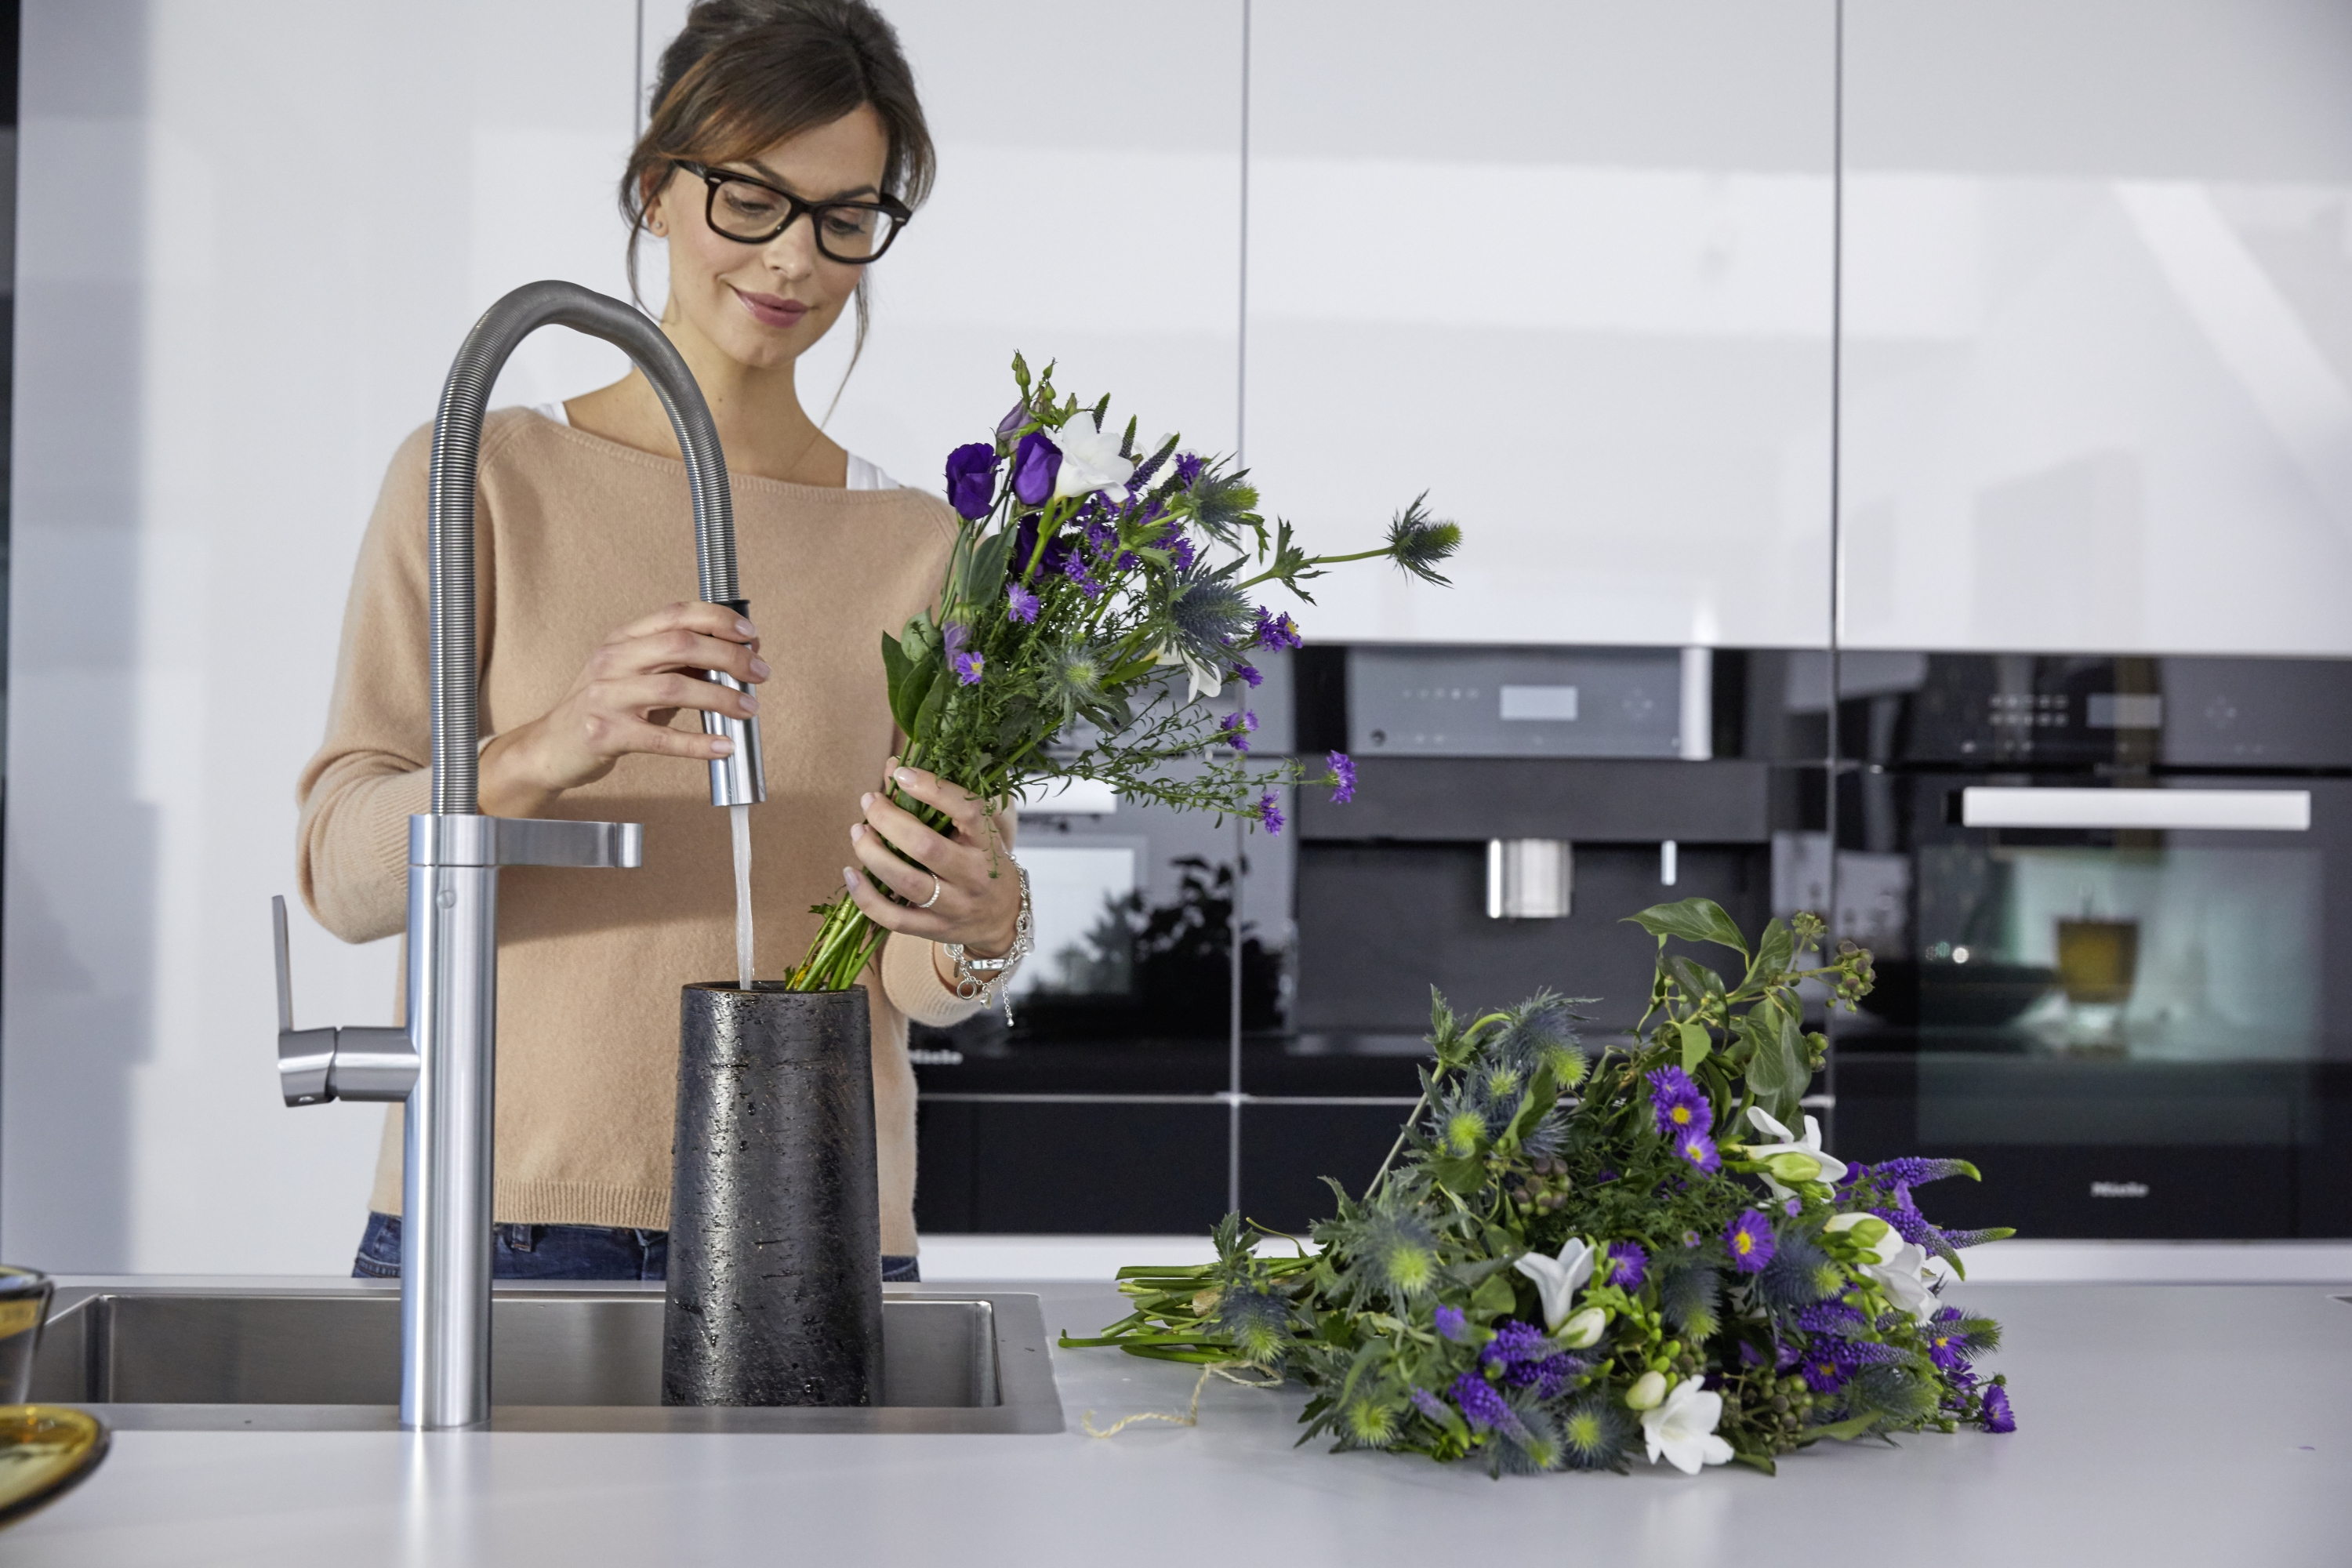 a woman is arranging flowers in a BLANCO stainless steel sink